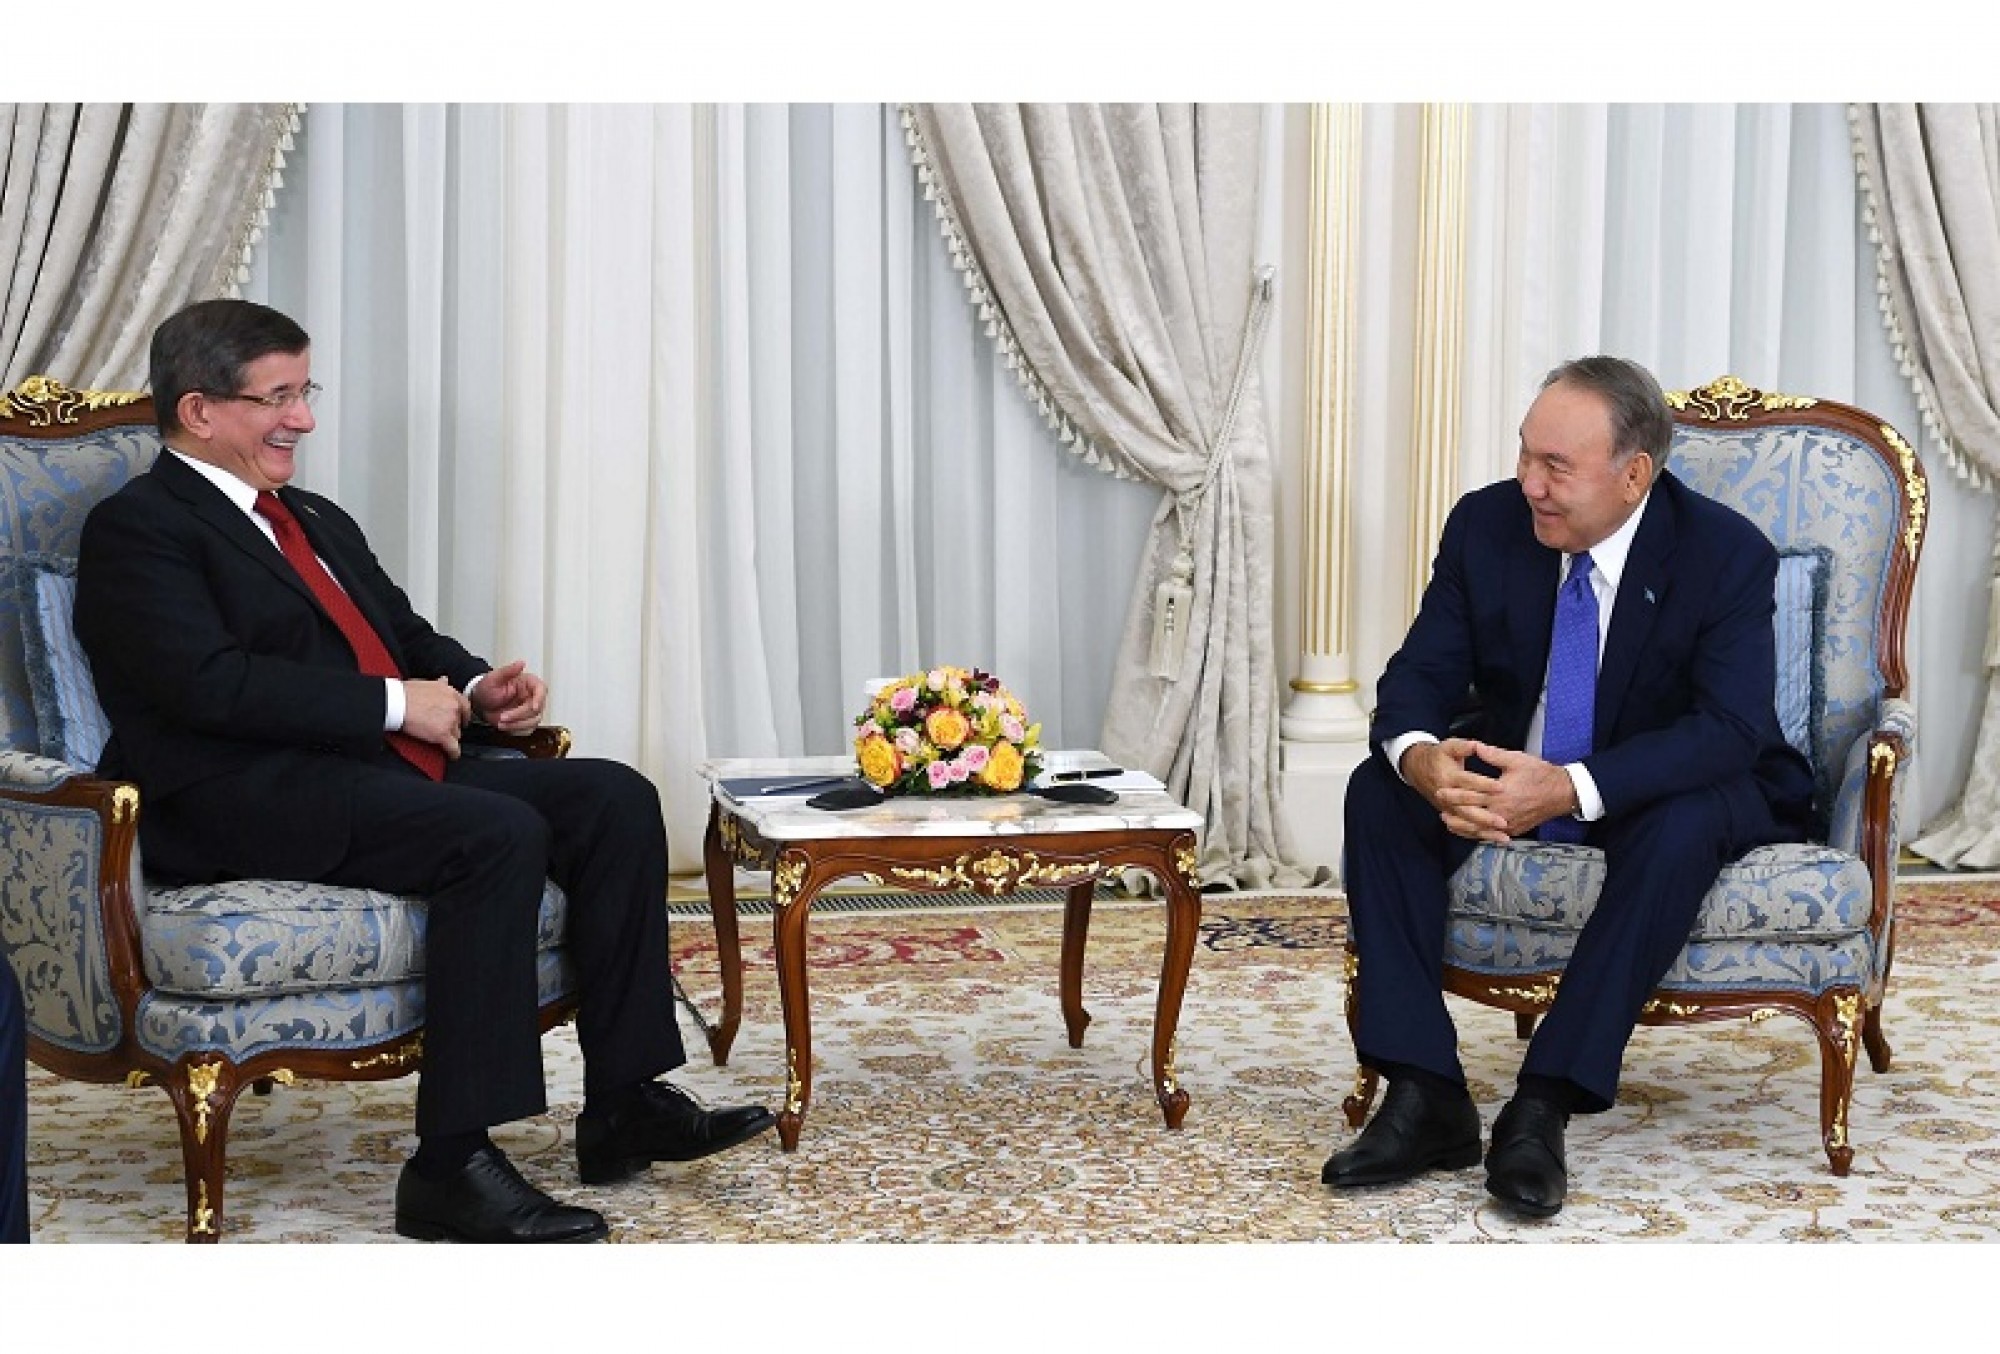 The head of state noted the importance of strengthening Kazakh-Turkish relations